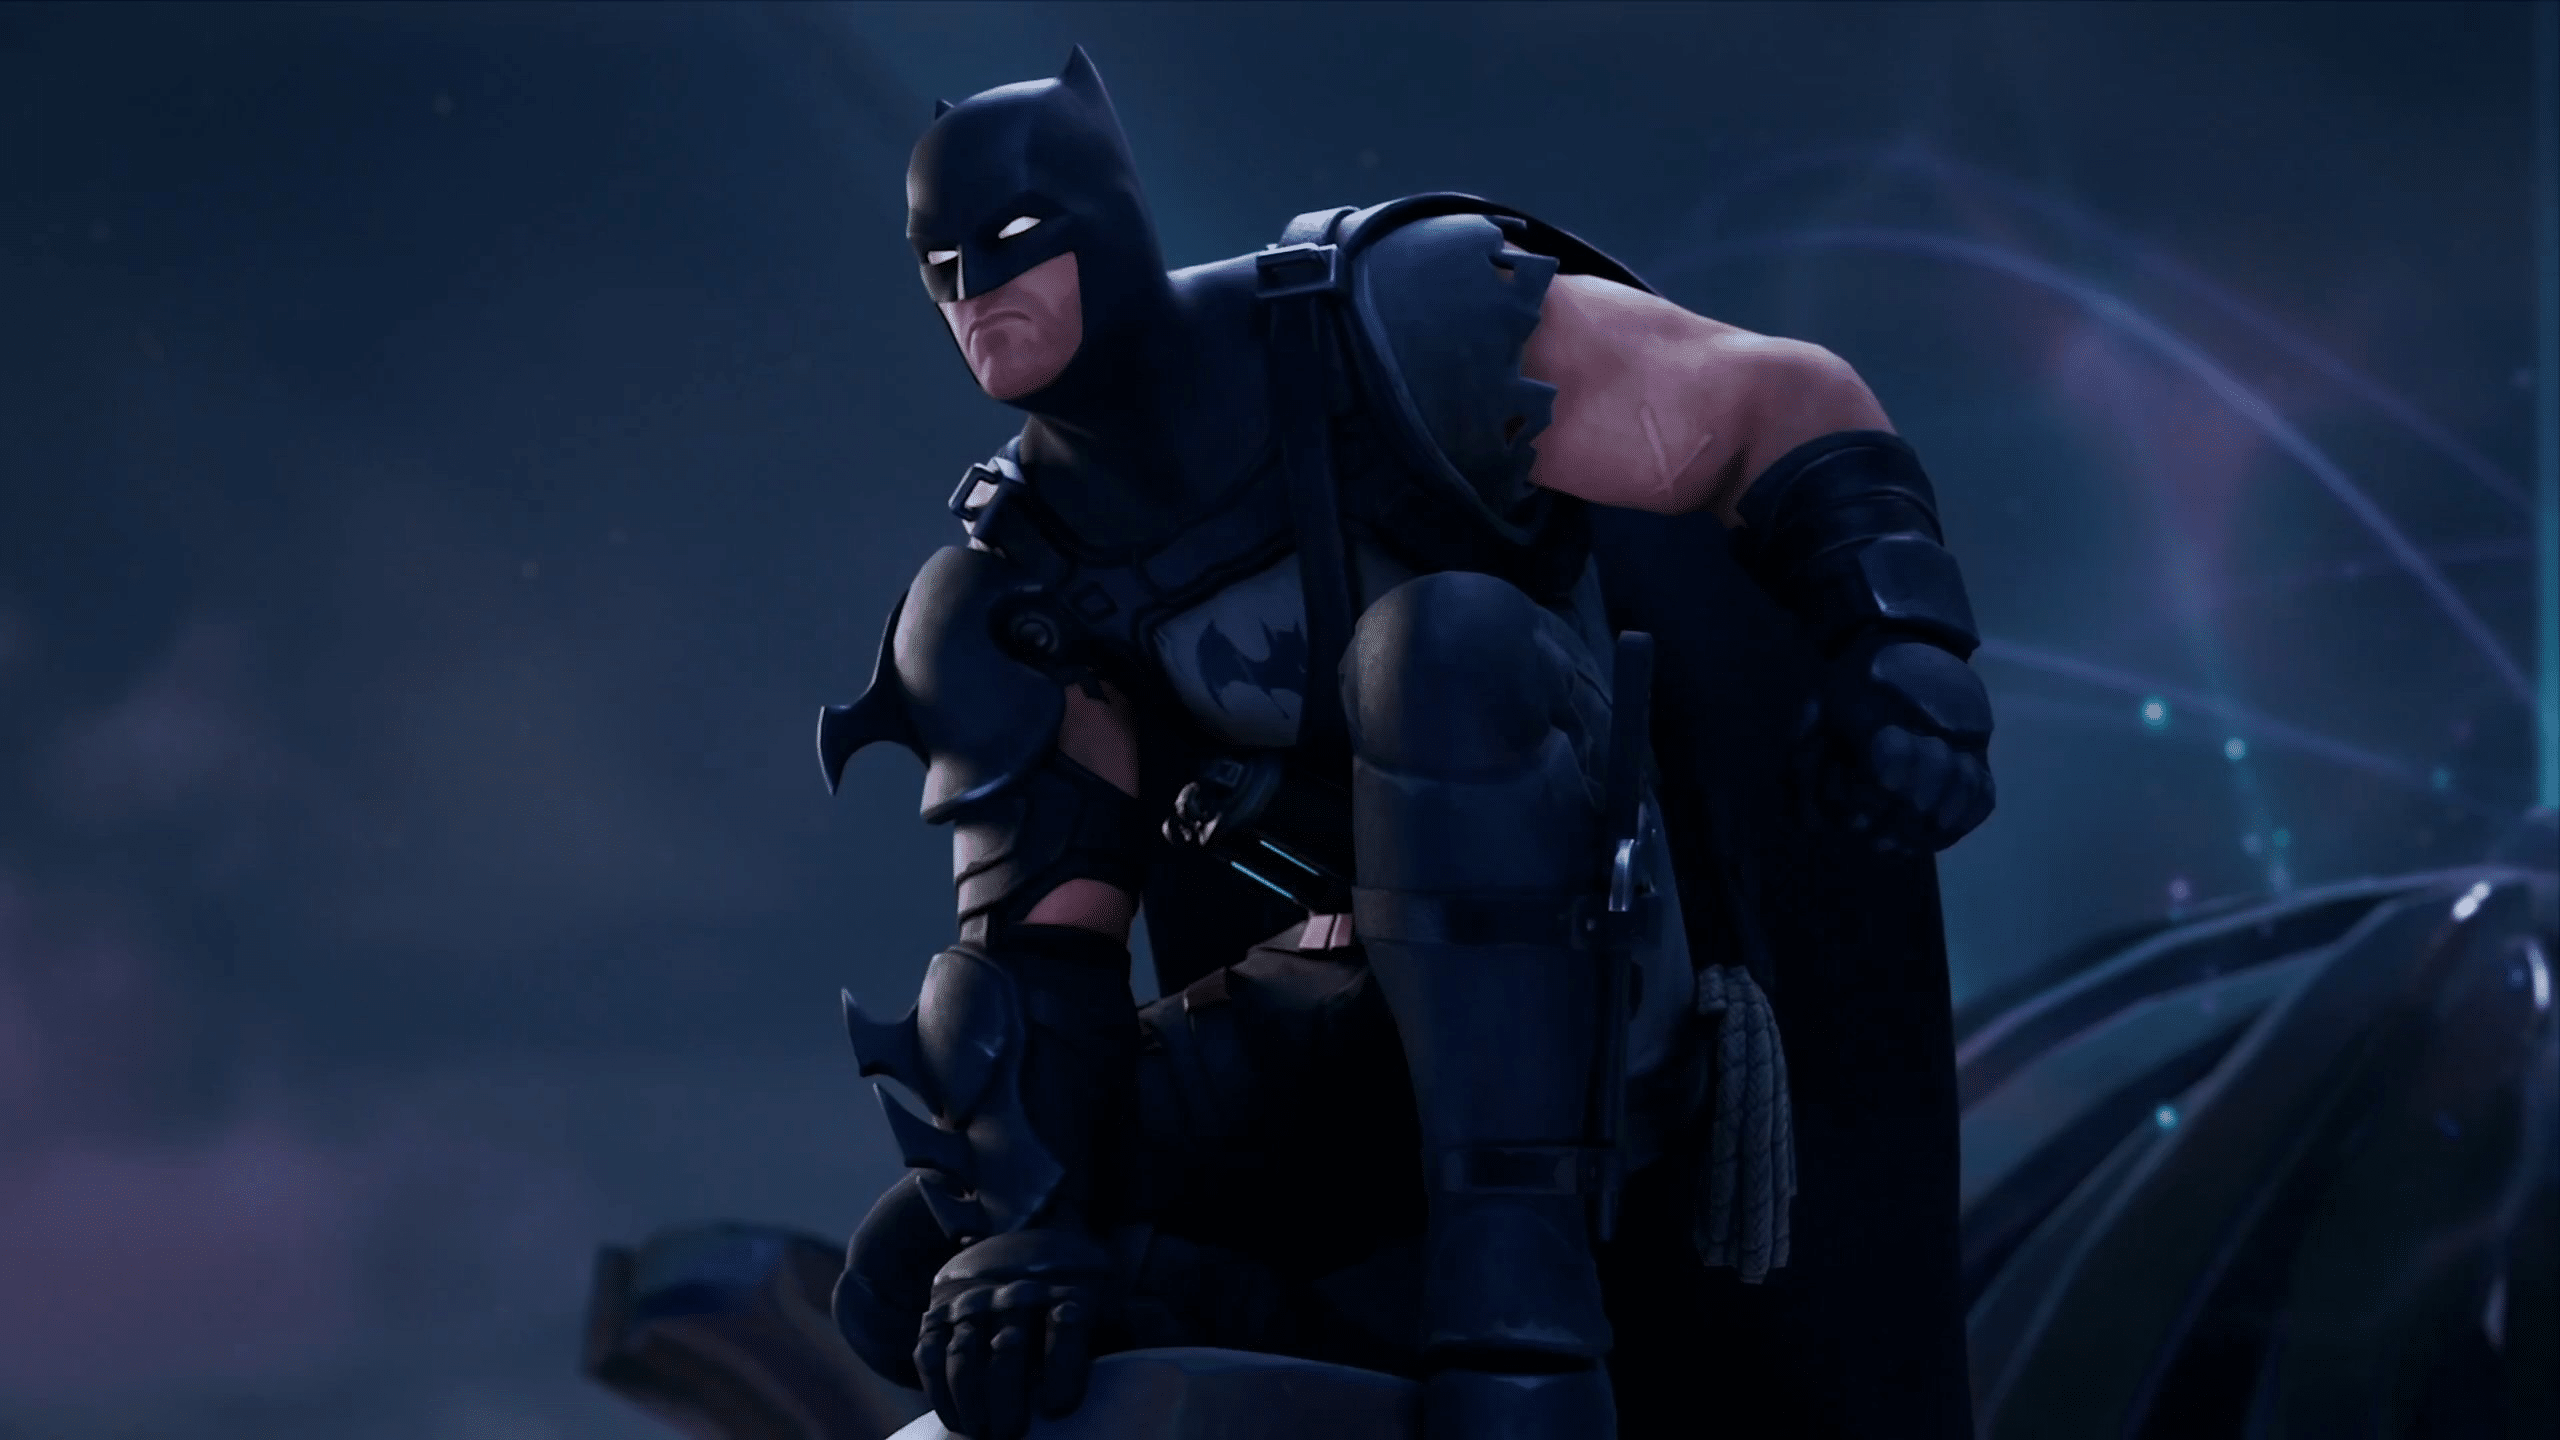 Armored Batman from The Zero Point and a trailer of Fortnite comic 